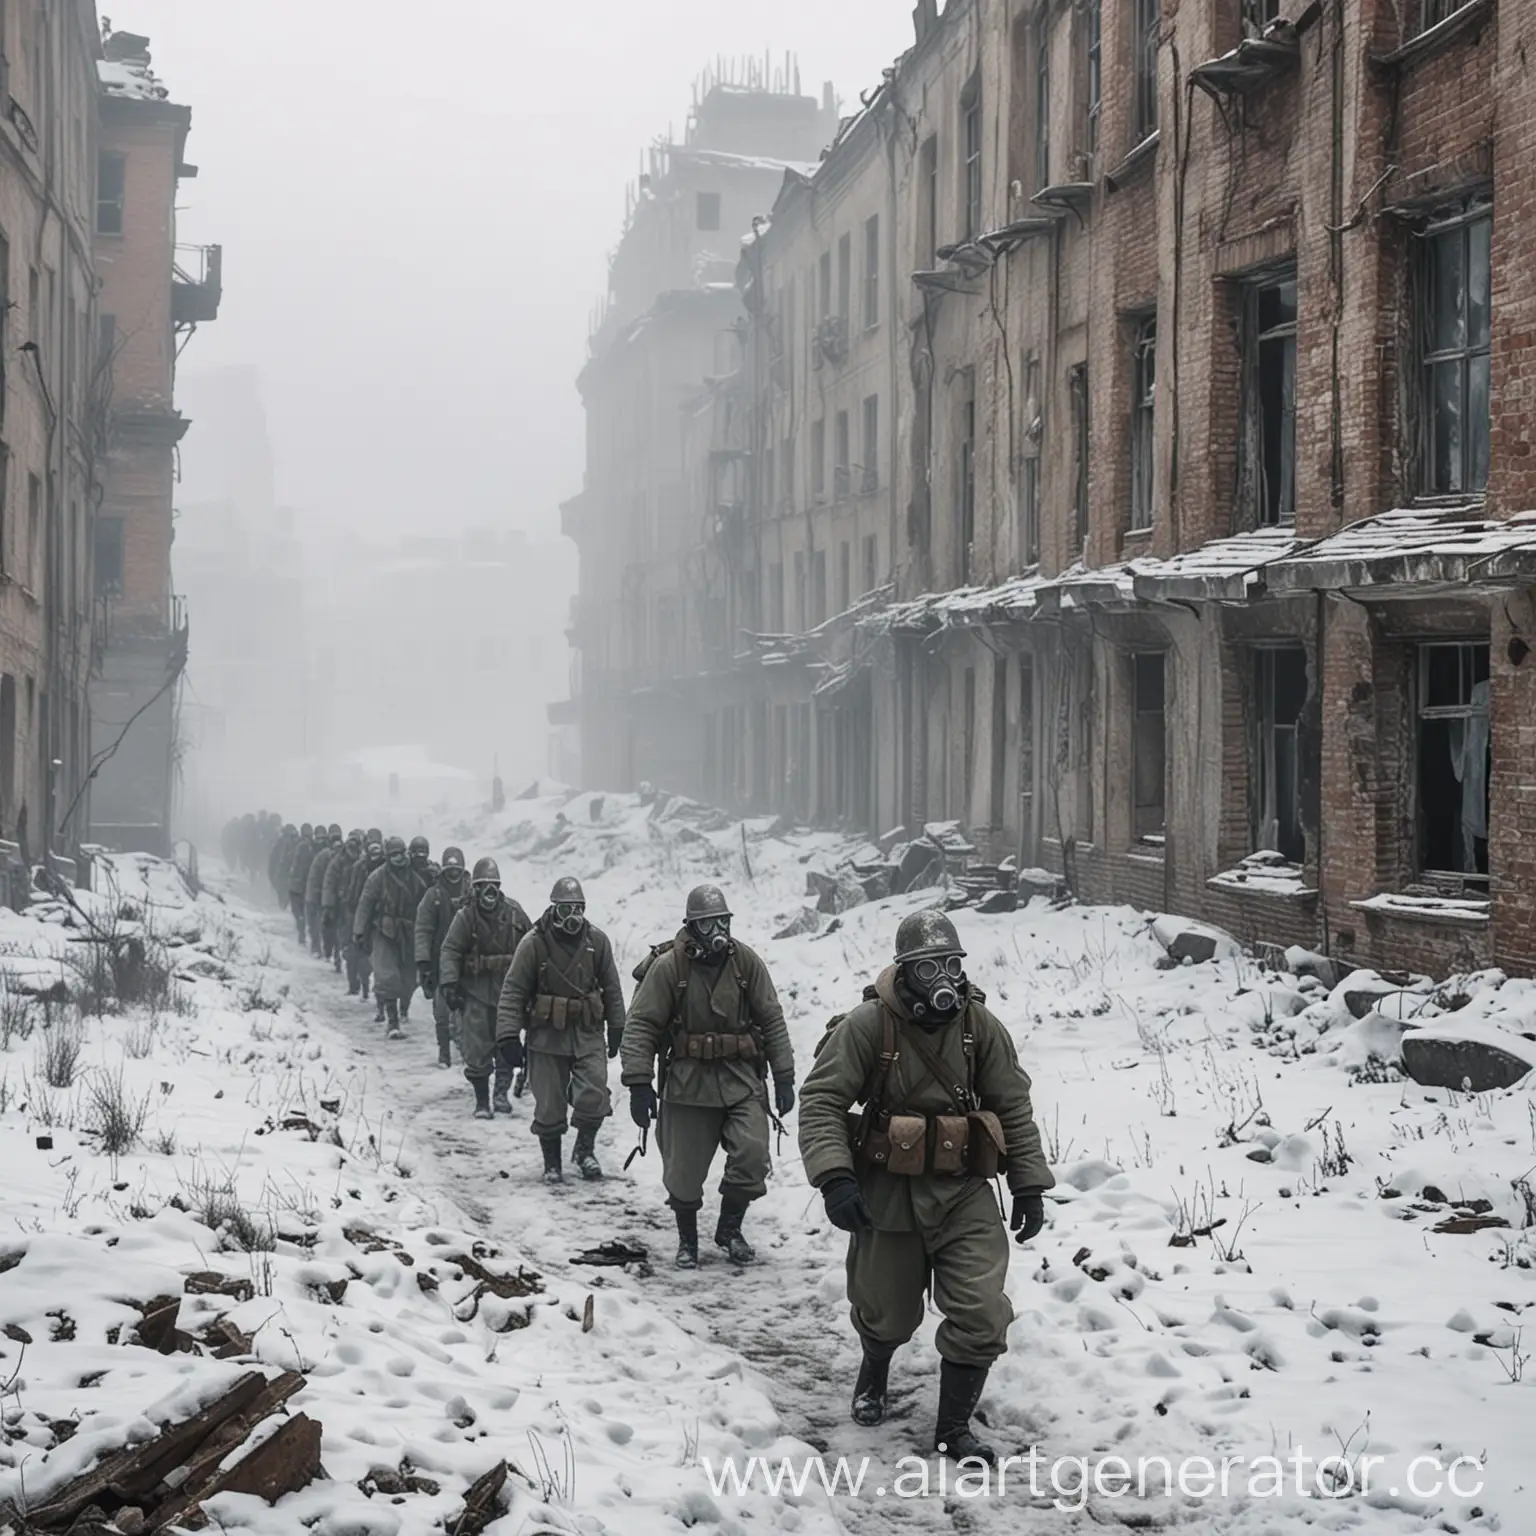 Russian-Soldiers-in-Gas-Masks-Amidst-Winter-Ruins